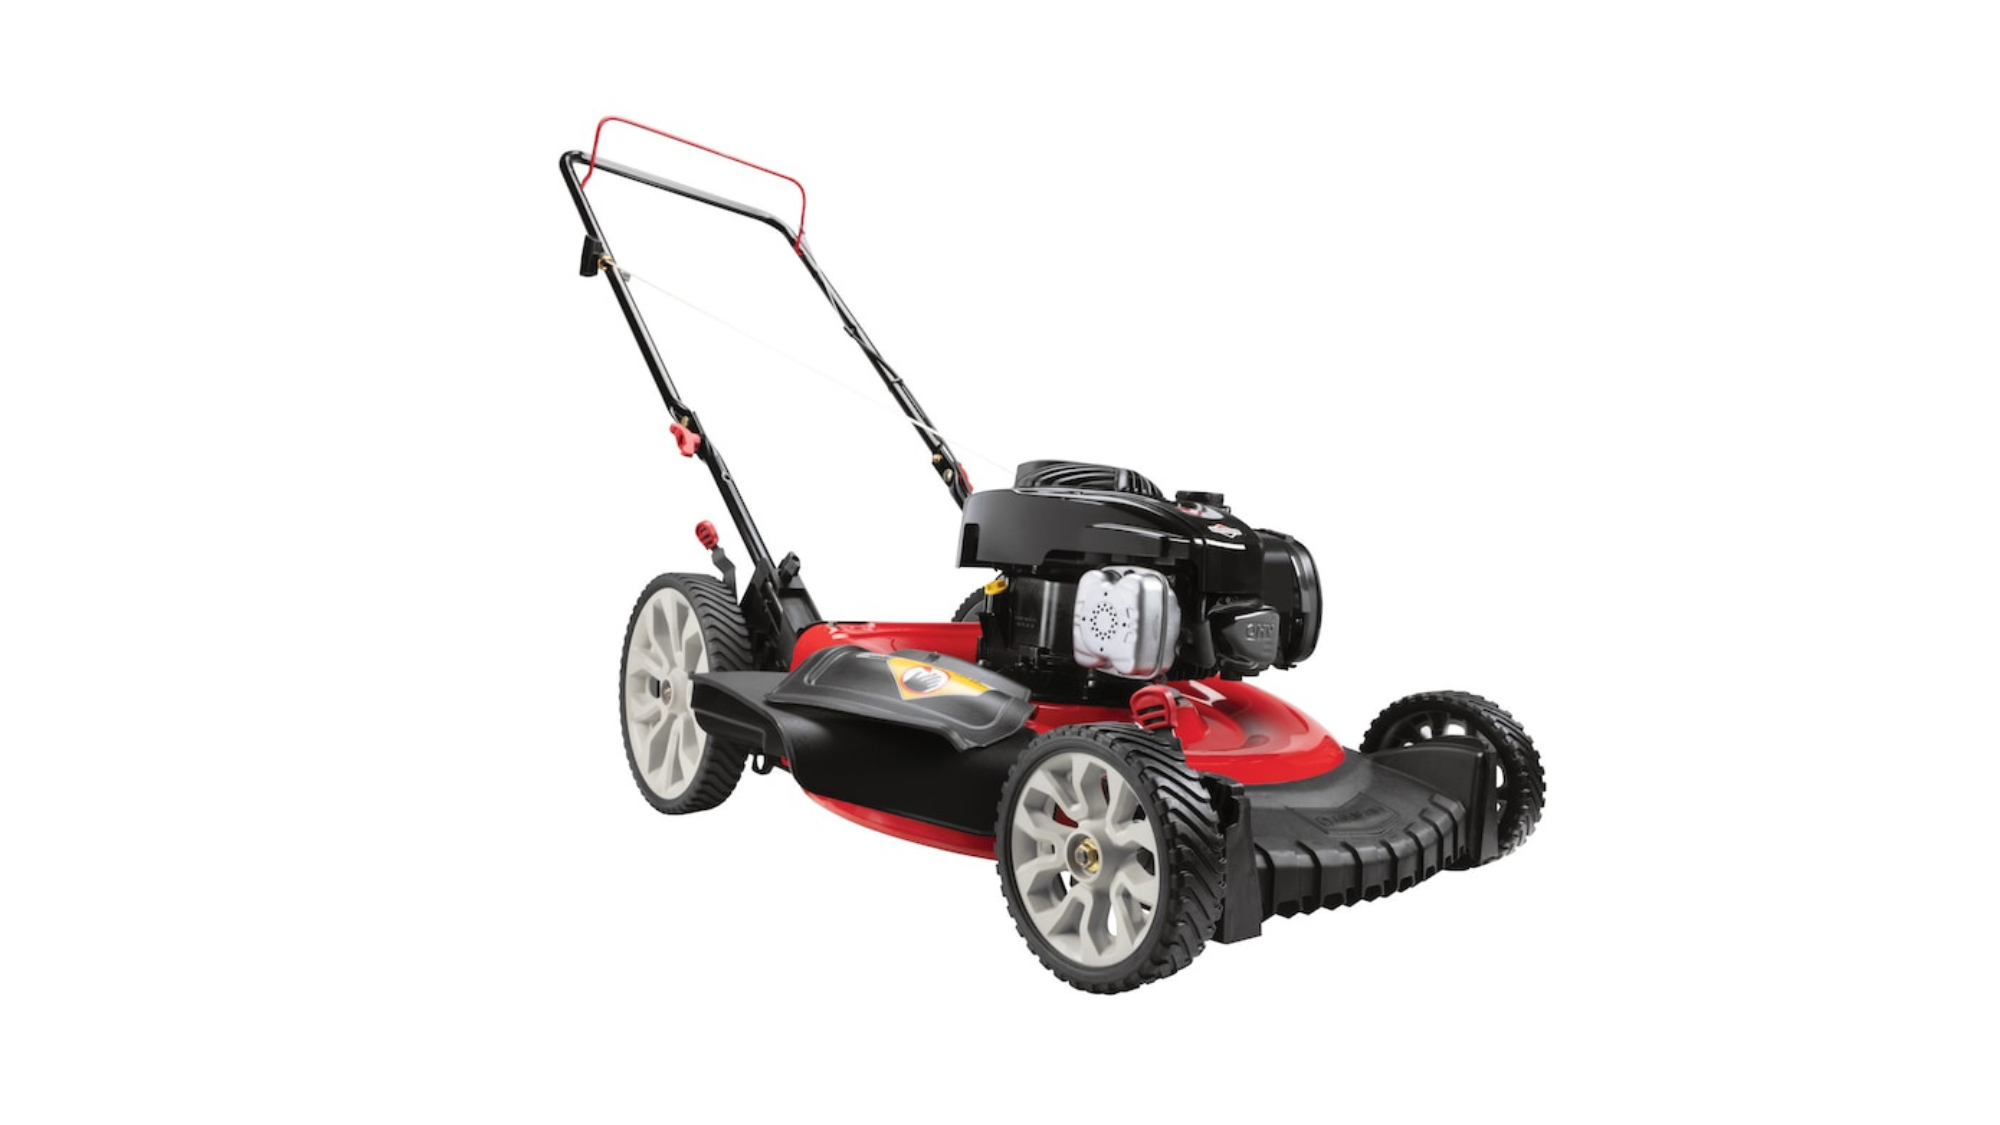 Red and black Troy-Bilt push lawn mower with mulcher on white background